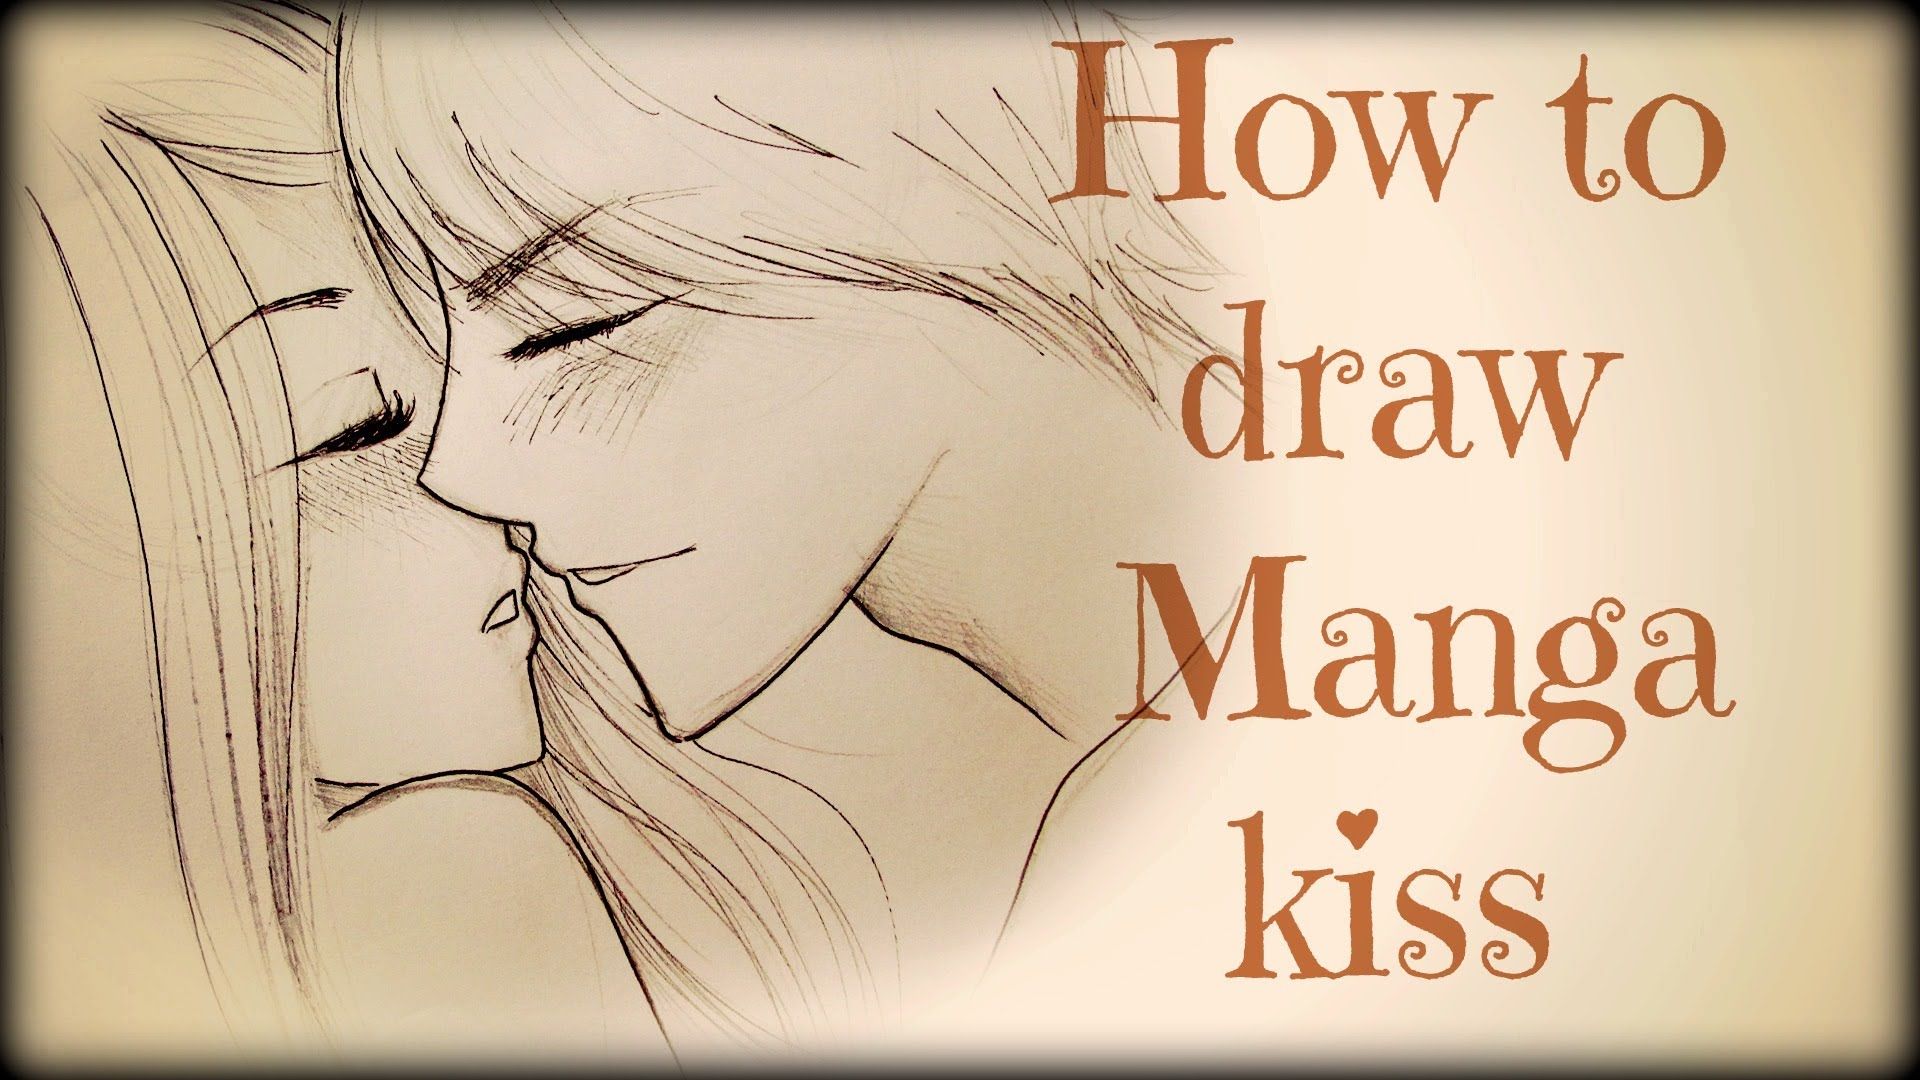 How to draw Kiss